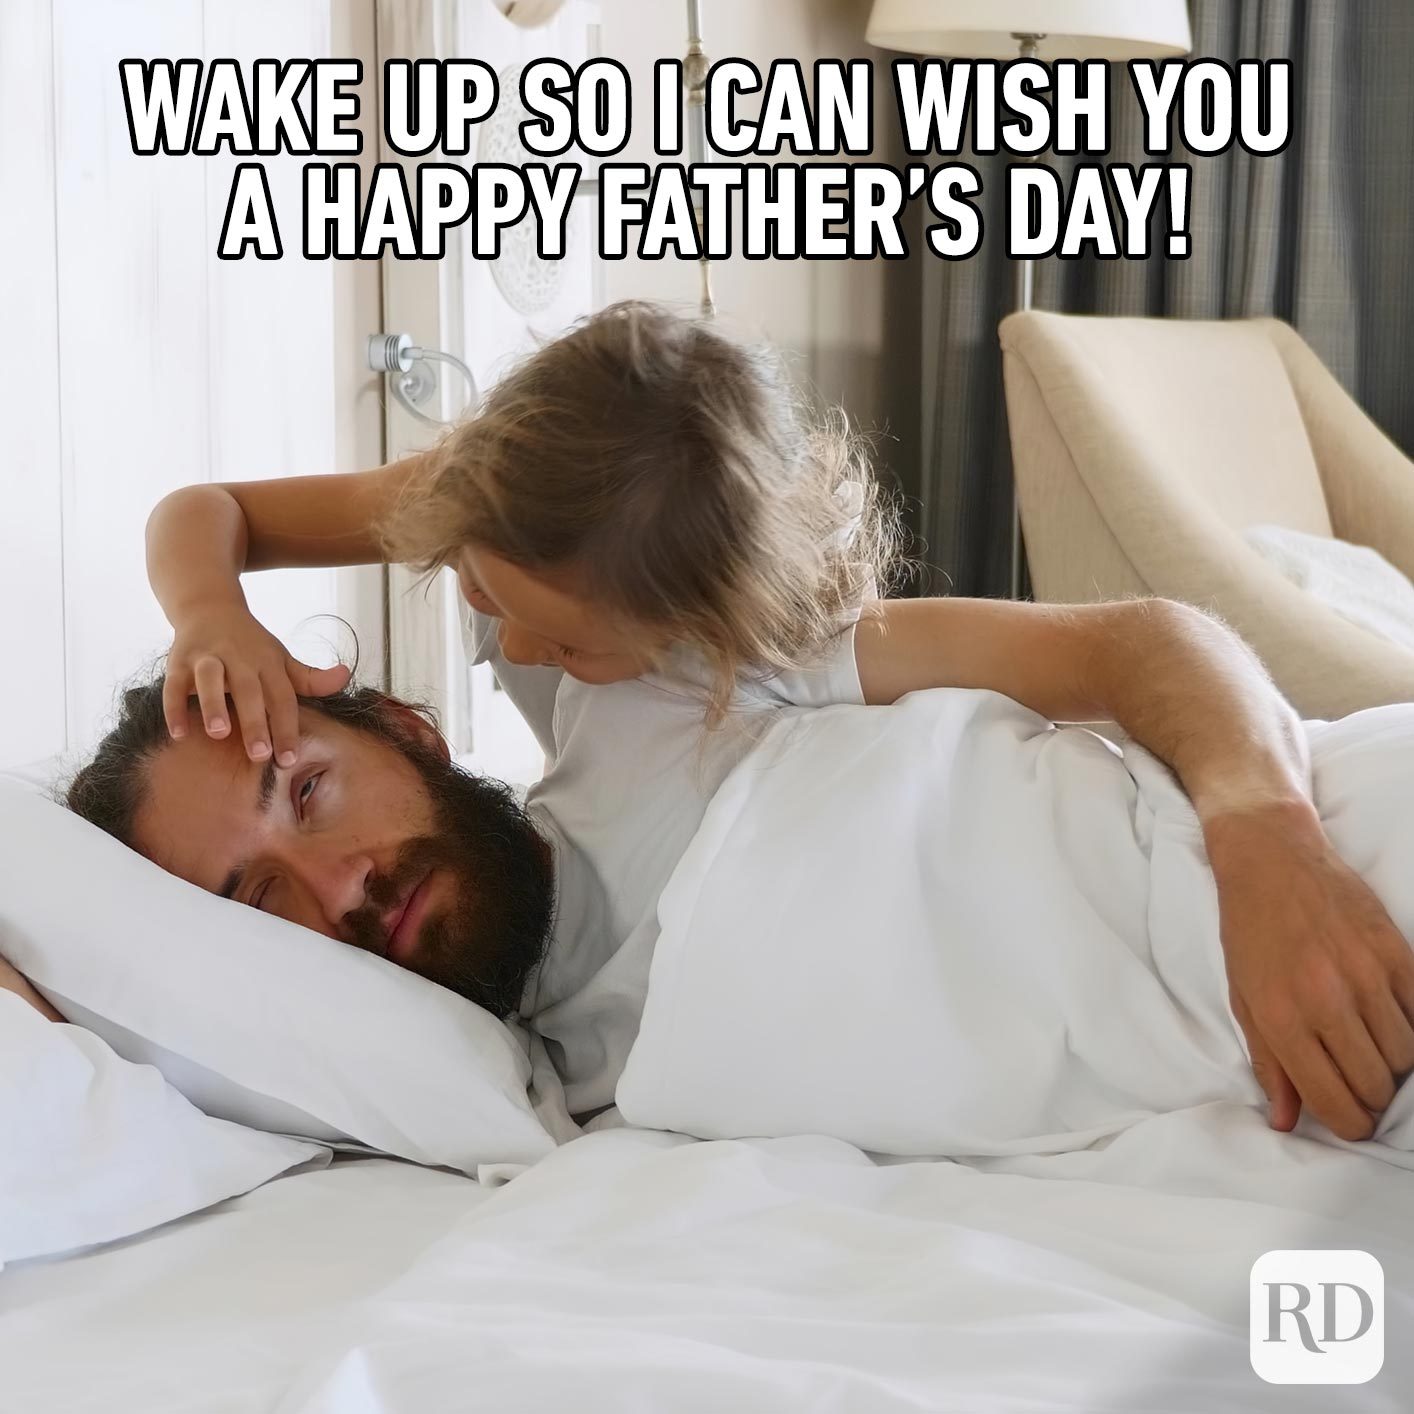 Girl trying to open her father's eye as he sleeps. Meme text: Wake up so I can wish you a Happy Father's Day!